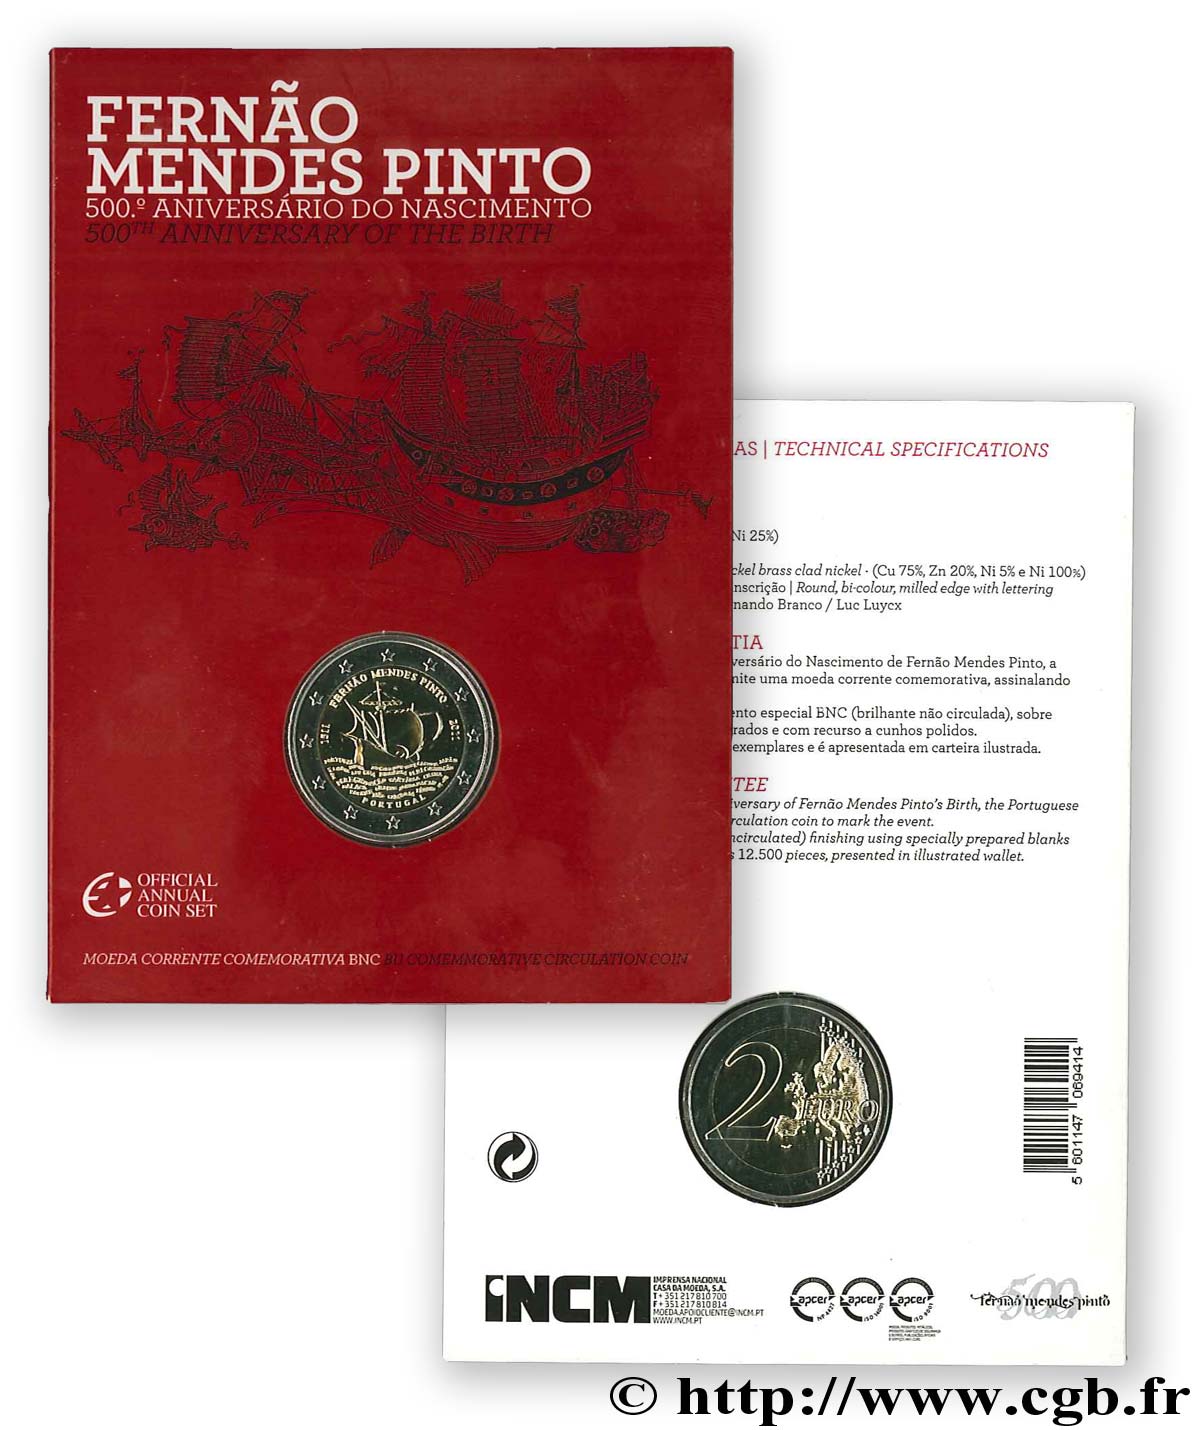 PORTUGAL Blister 2 Euro FERNAO MENDES PINTO 2011 Brilliant Uncirculated